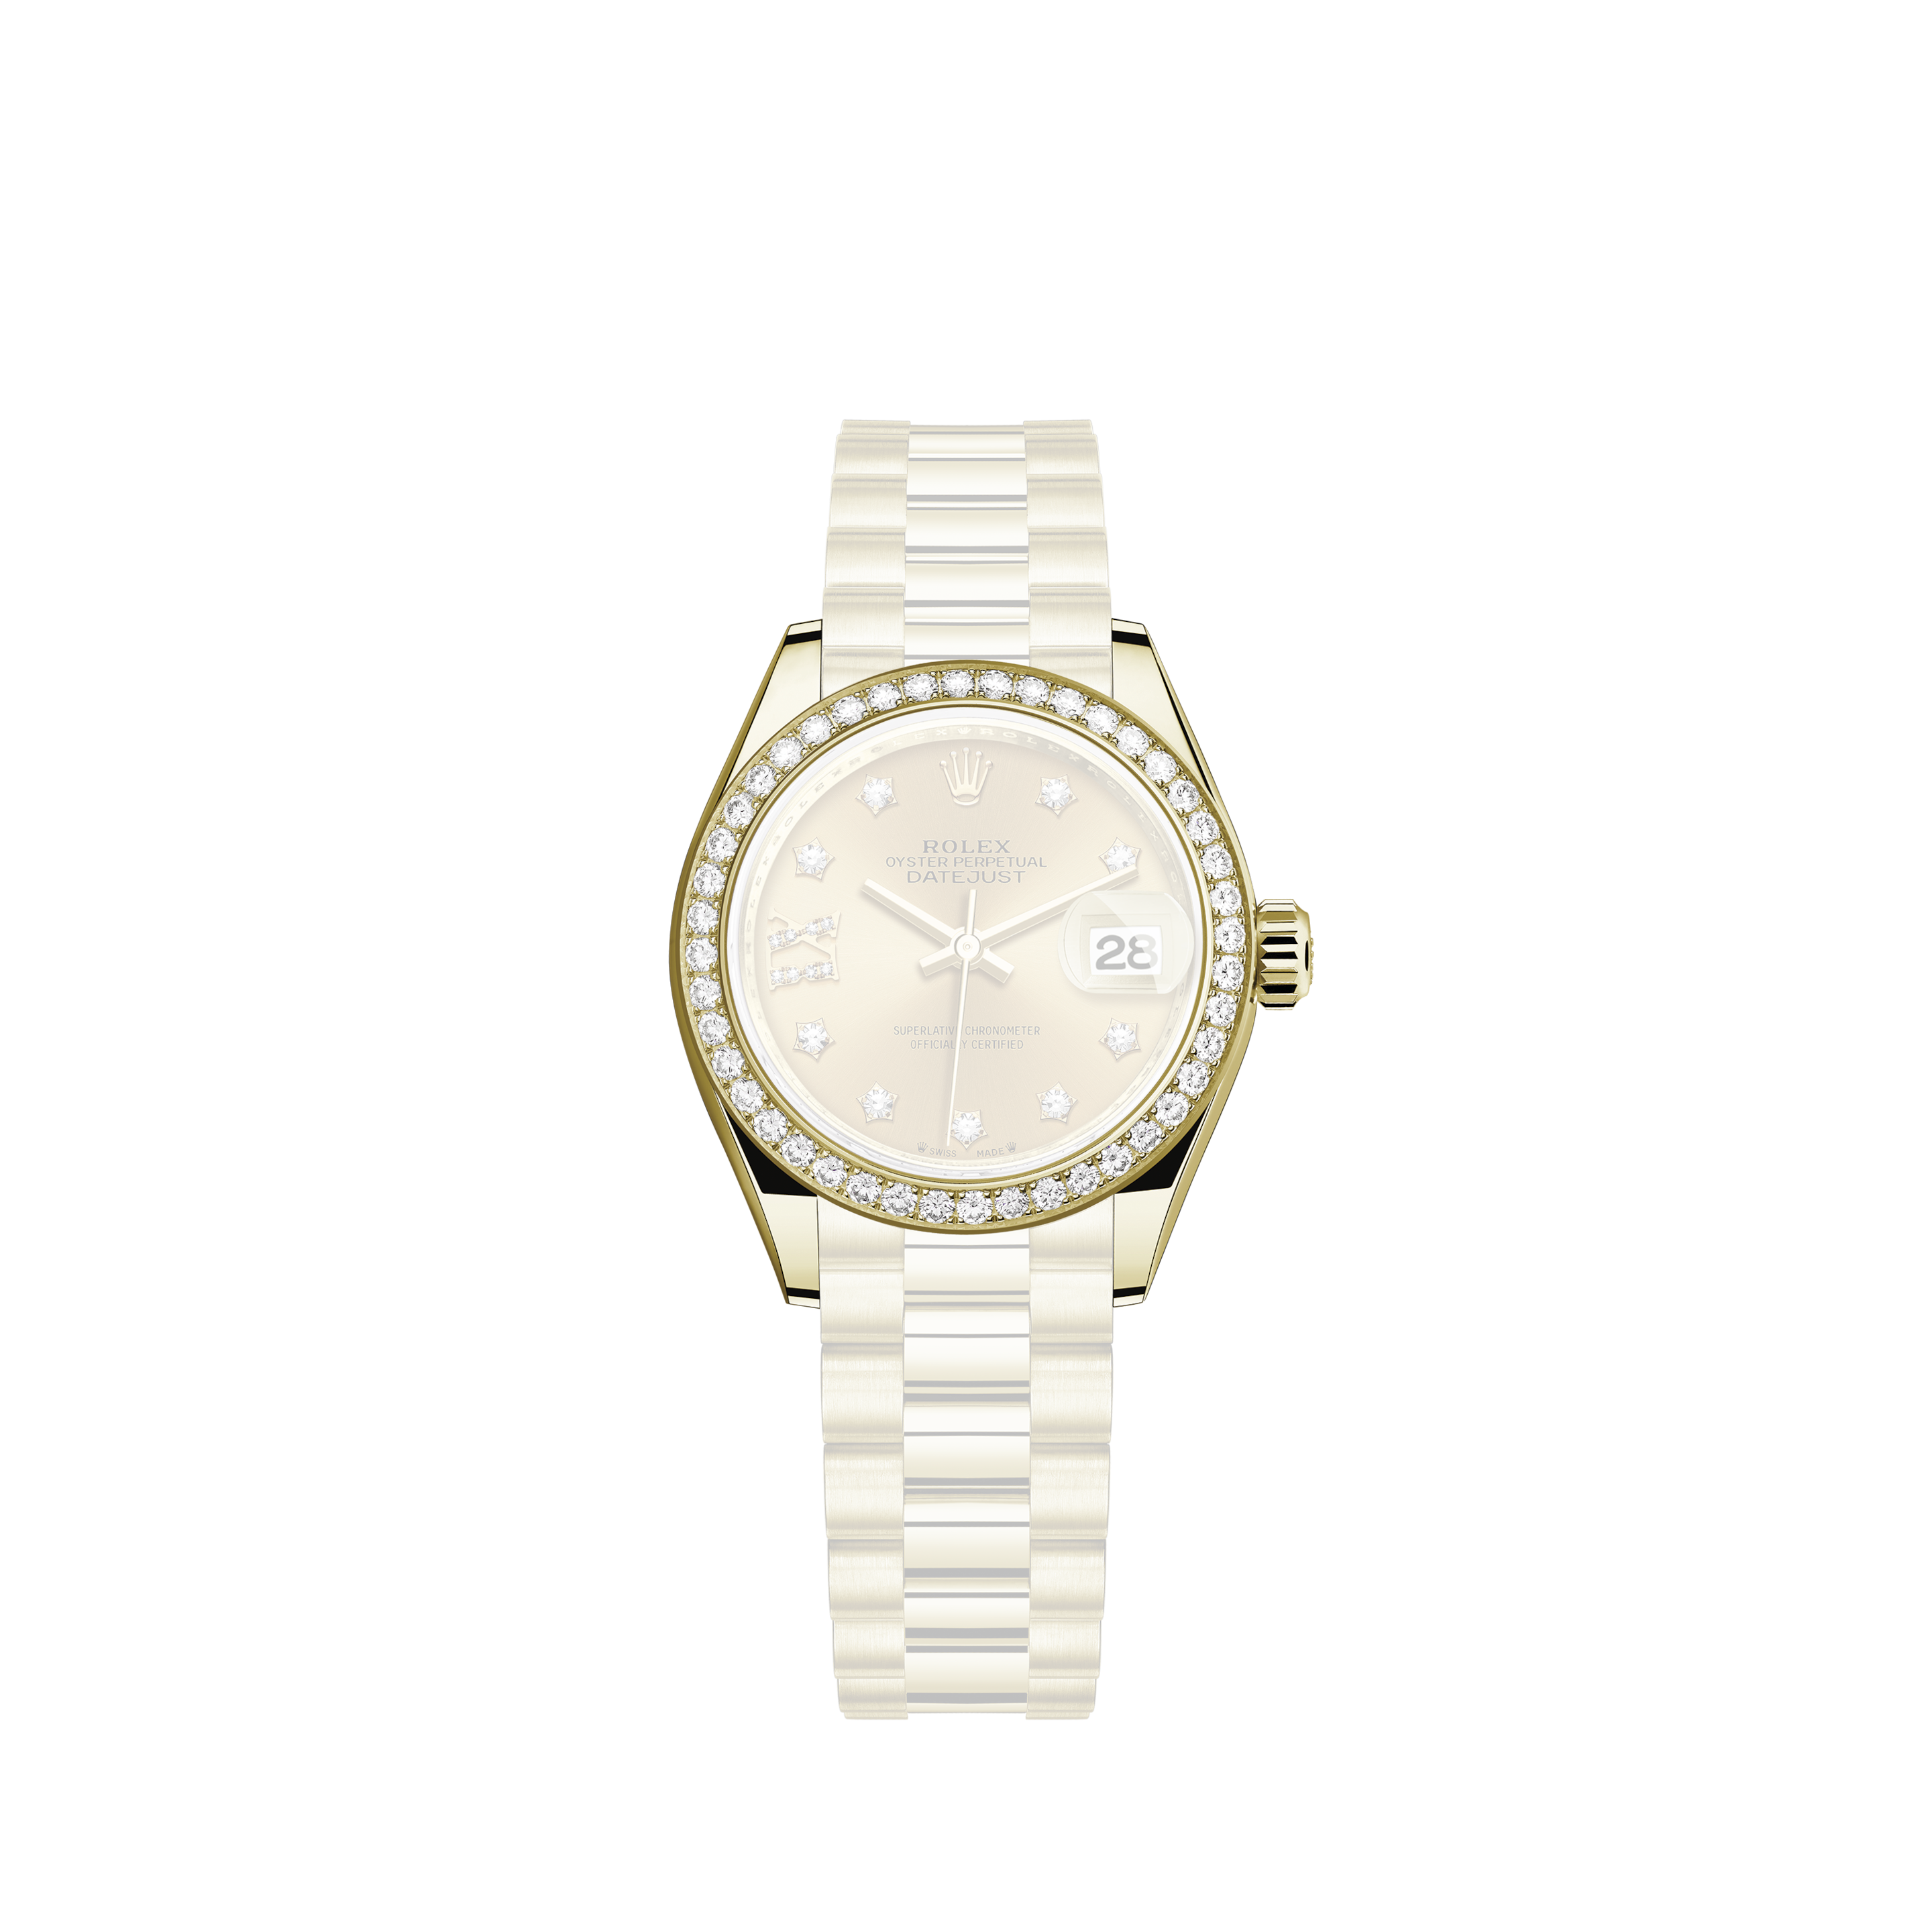 Rolex Women's New Style Steel Datejust with Custom White Diamond DialRolex Women's New Style Two-Tone Datejust with Custom Black Diamond Dial